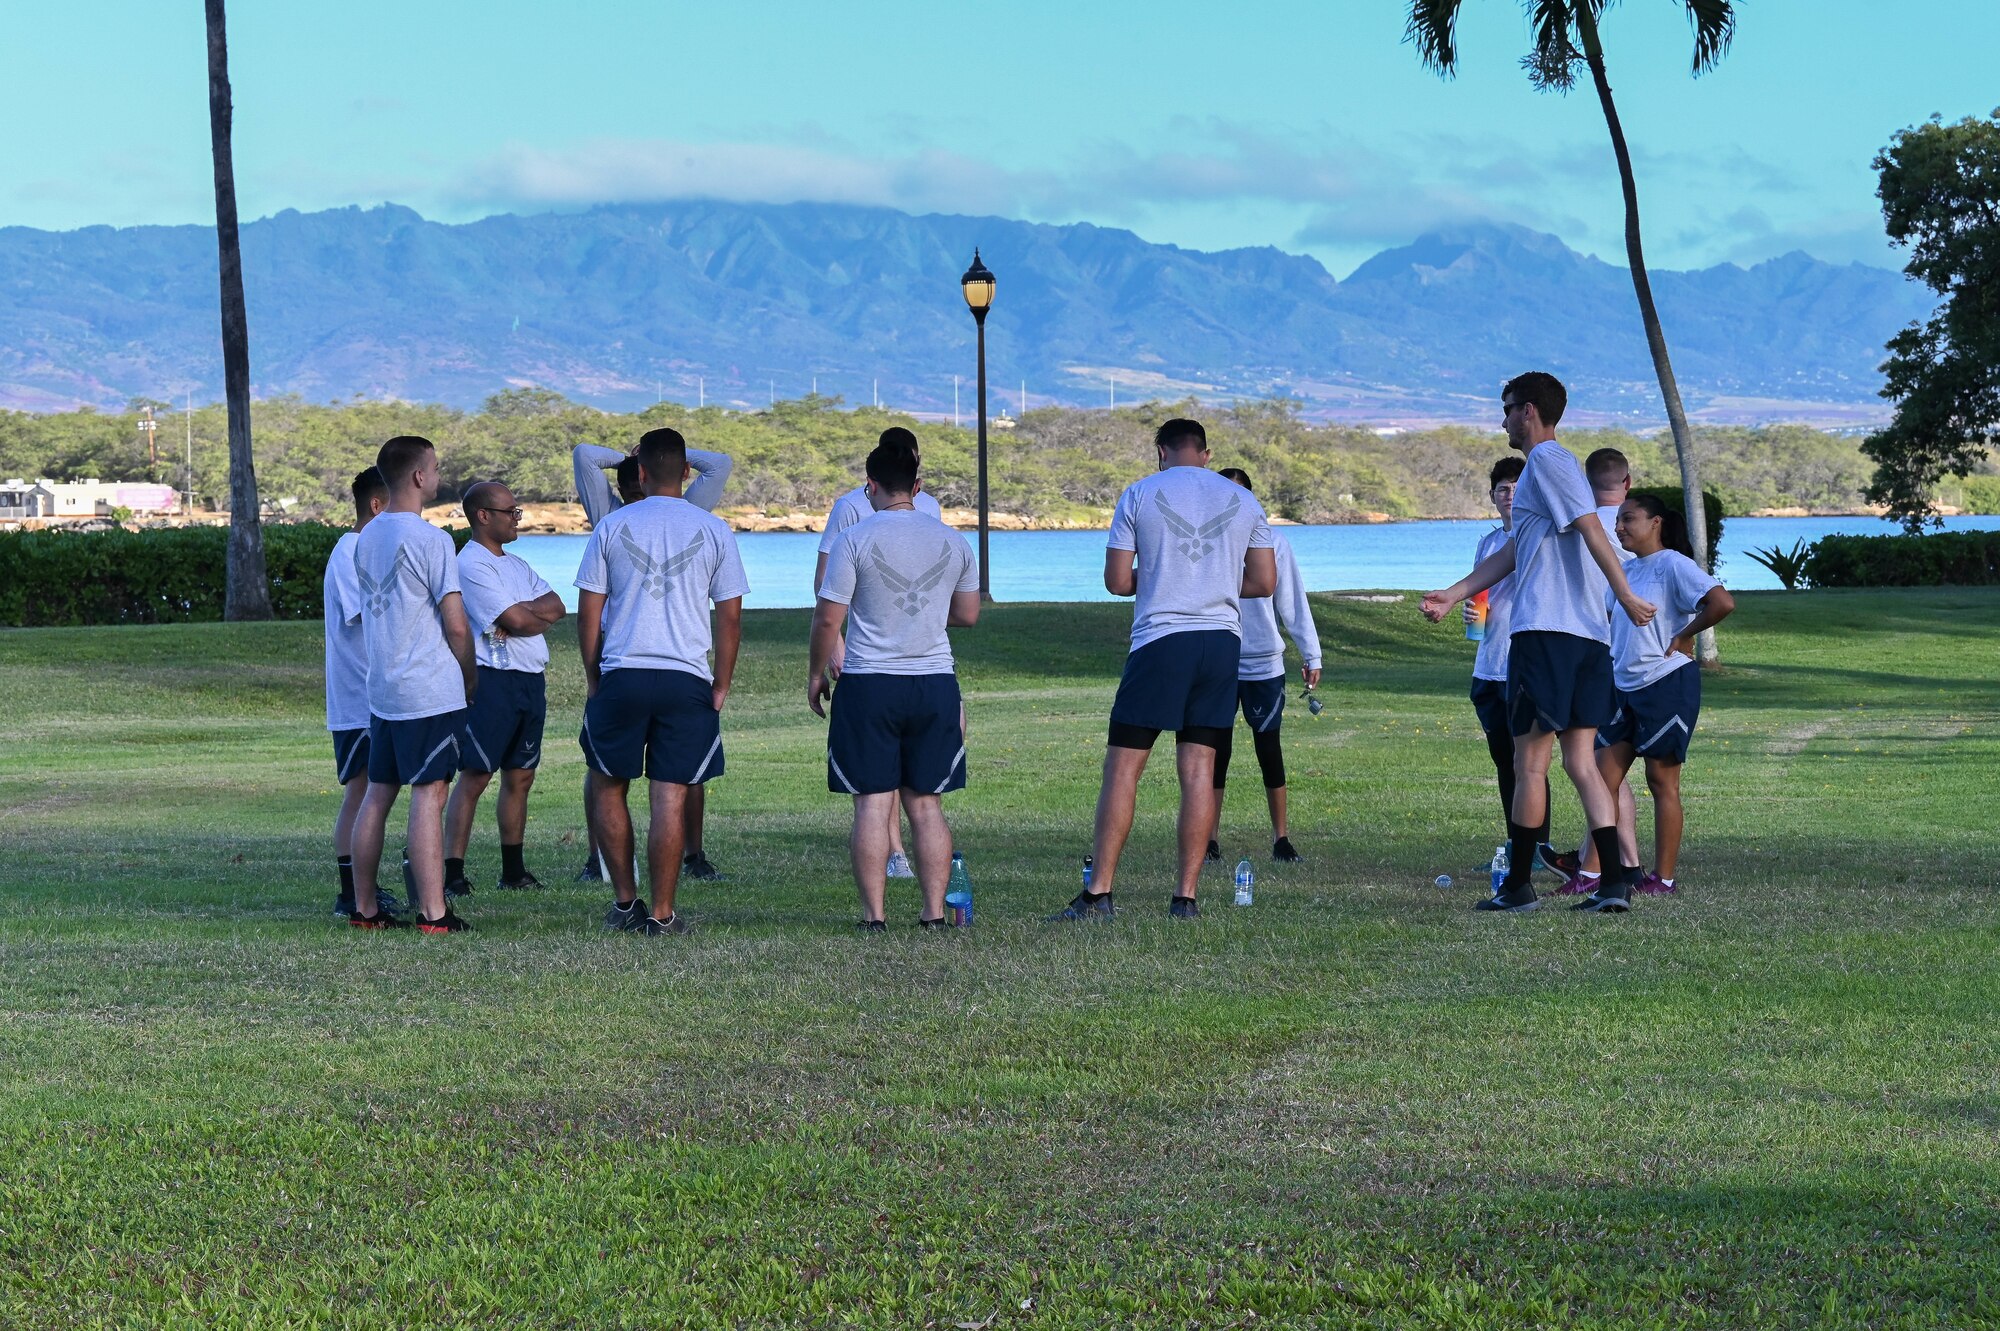 Students attending the Noncommissioned Officer Academy at the Binnicker Professional Military Education Center stretch before a school run at Joint Base Pearl Harbor-Hickam, Hawaii, April 14, 2022. The NCOA is the second level of Enlisted Professional Military Education and prepares Technical Sergeants to manage and lead units. (U.S. Air Force photo by 1st Lt. Benjamin Aronson)